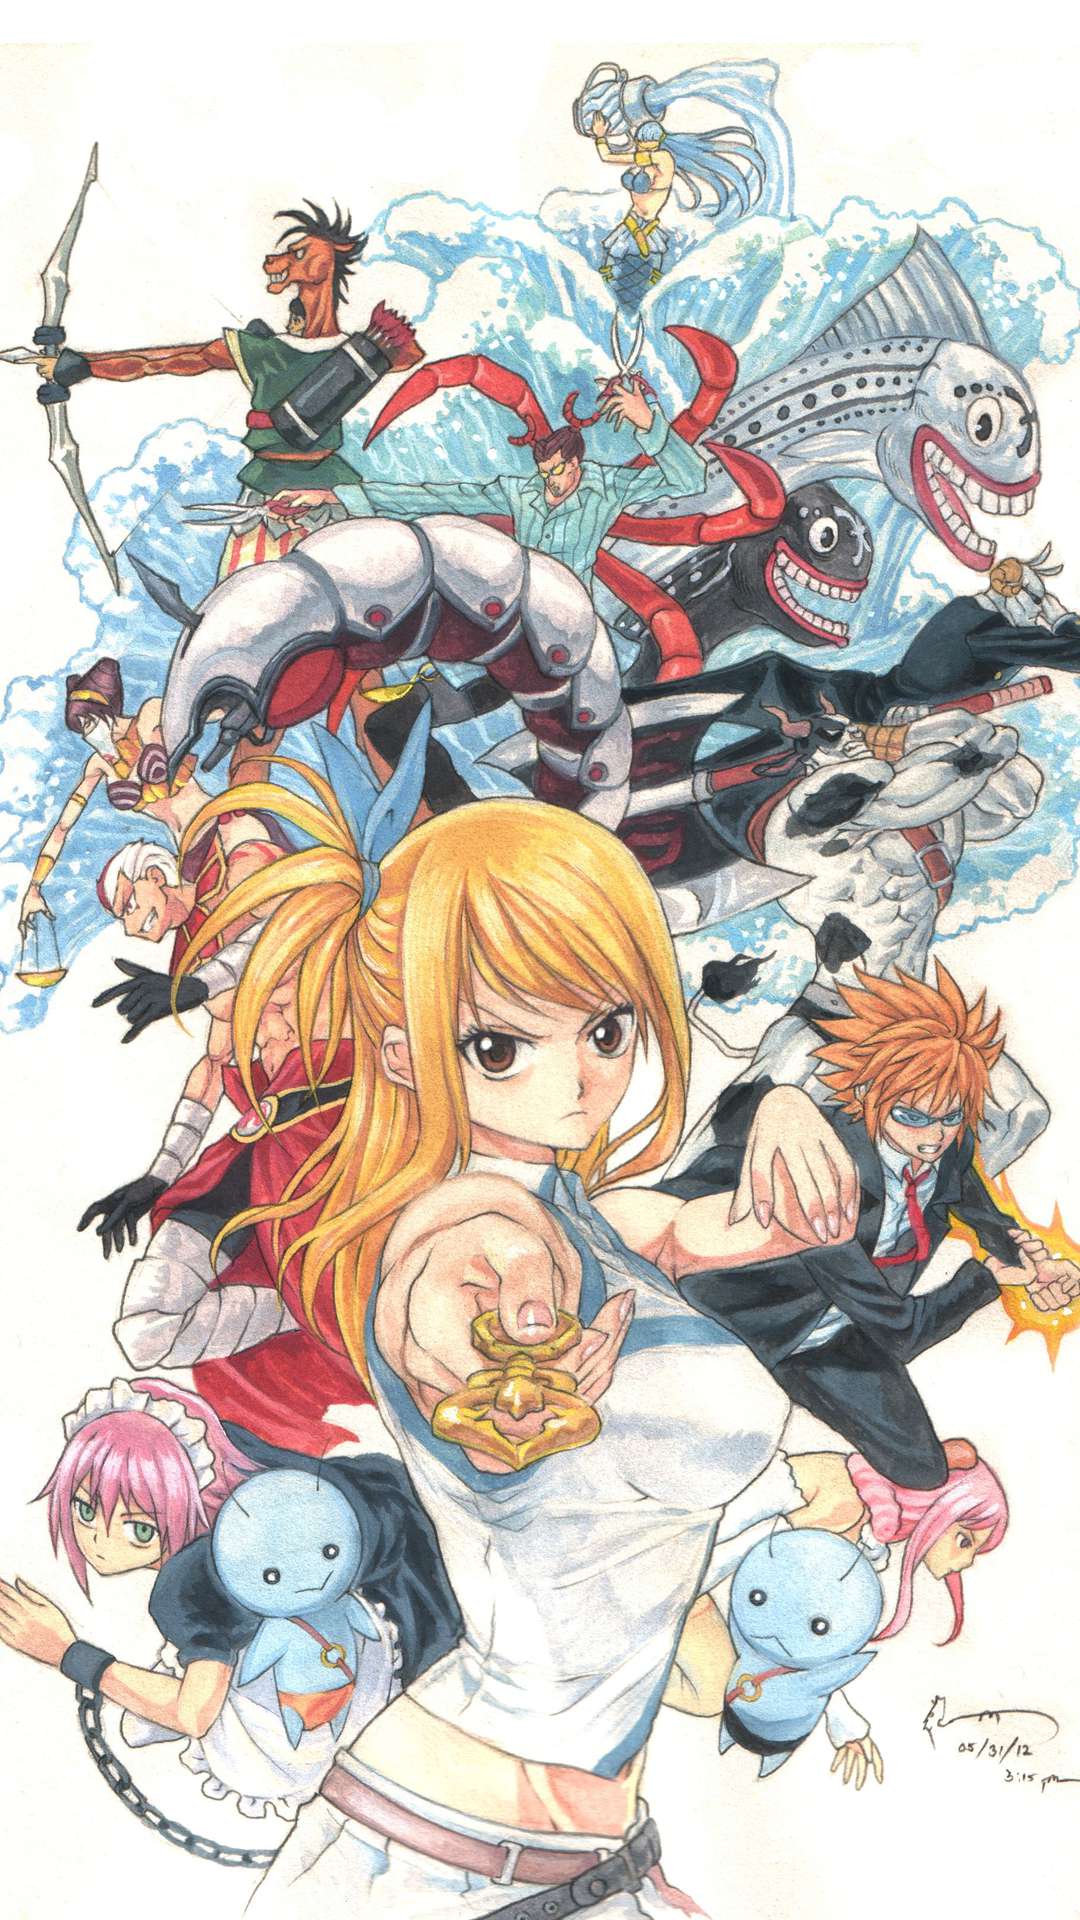 2225x1616  2225x1616 Lucy Heartfilia Happy Fairy Tail Natsu Dragneel  wallpaper  Coolwallpapersme